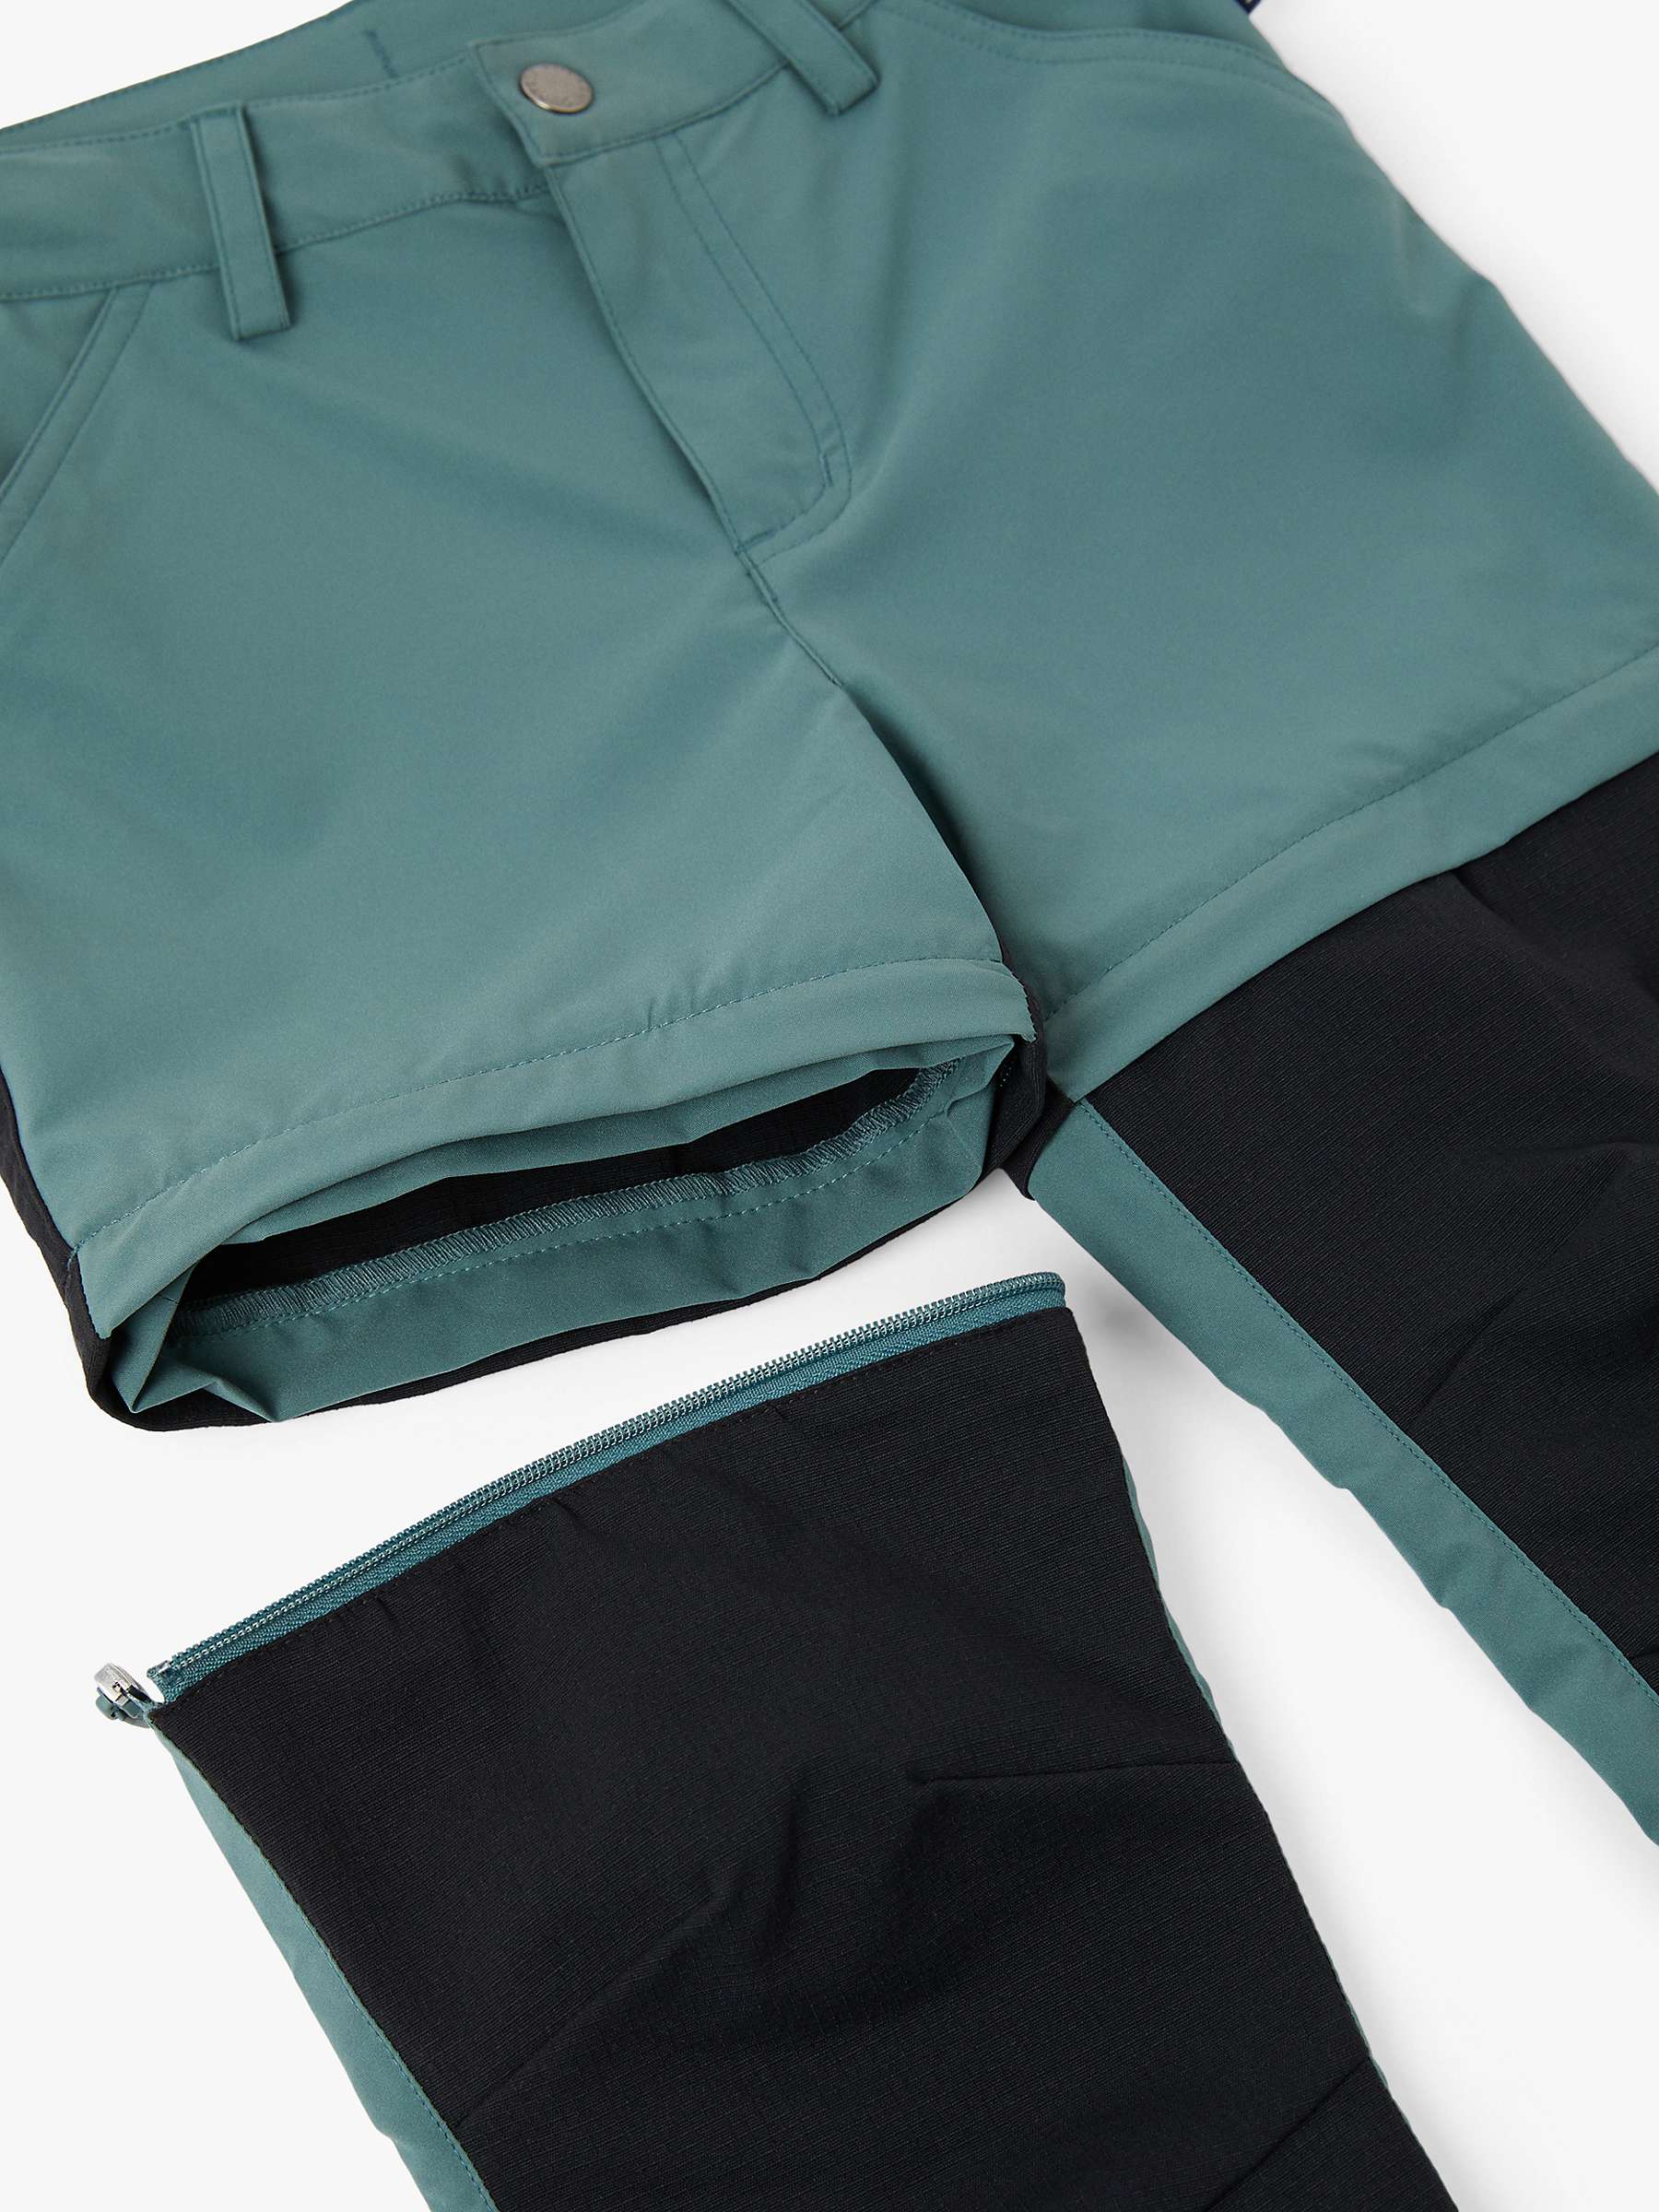 Buy Polarn O. Pyret Kids' Recycled Water Repellent Outerwear Trousers, Blue Teal Online at johnlewis.com